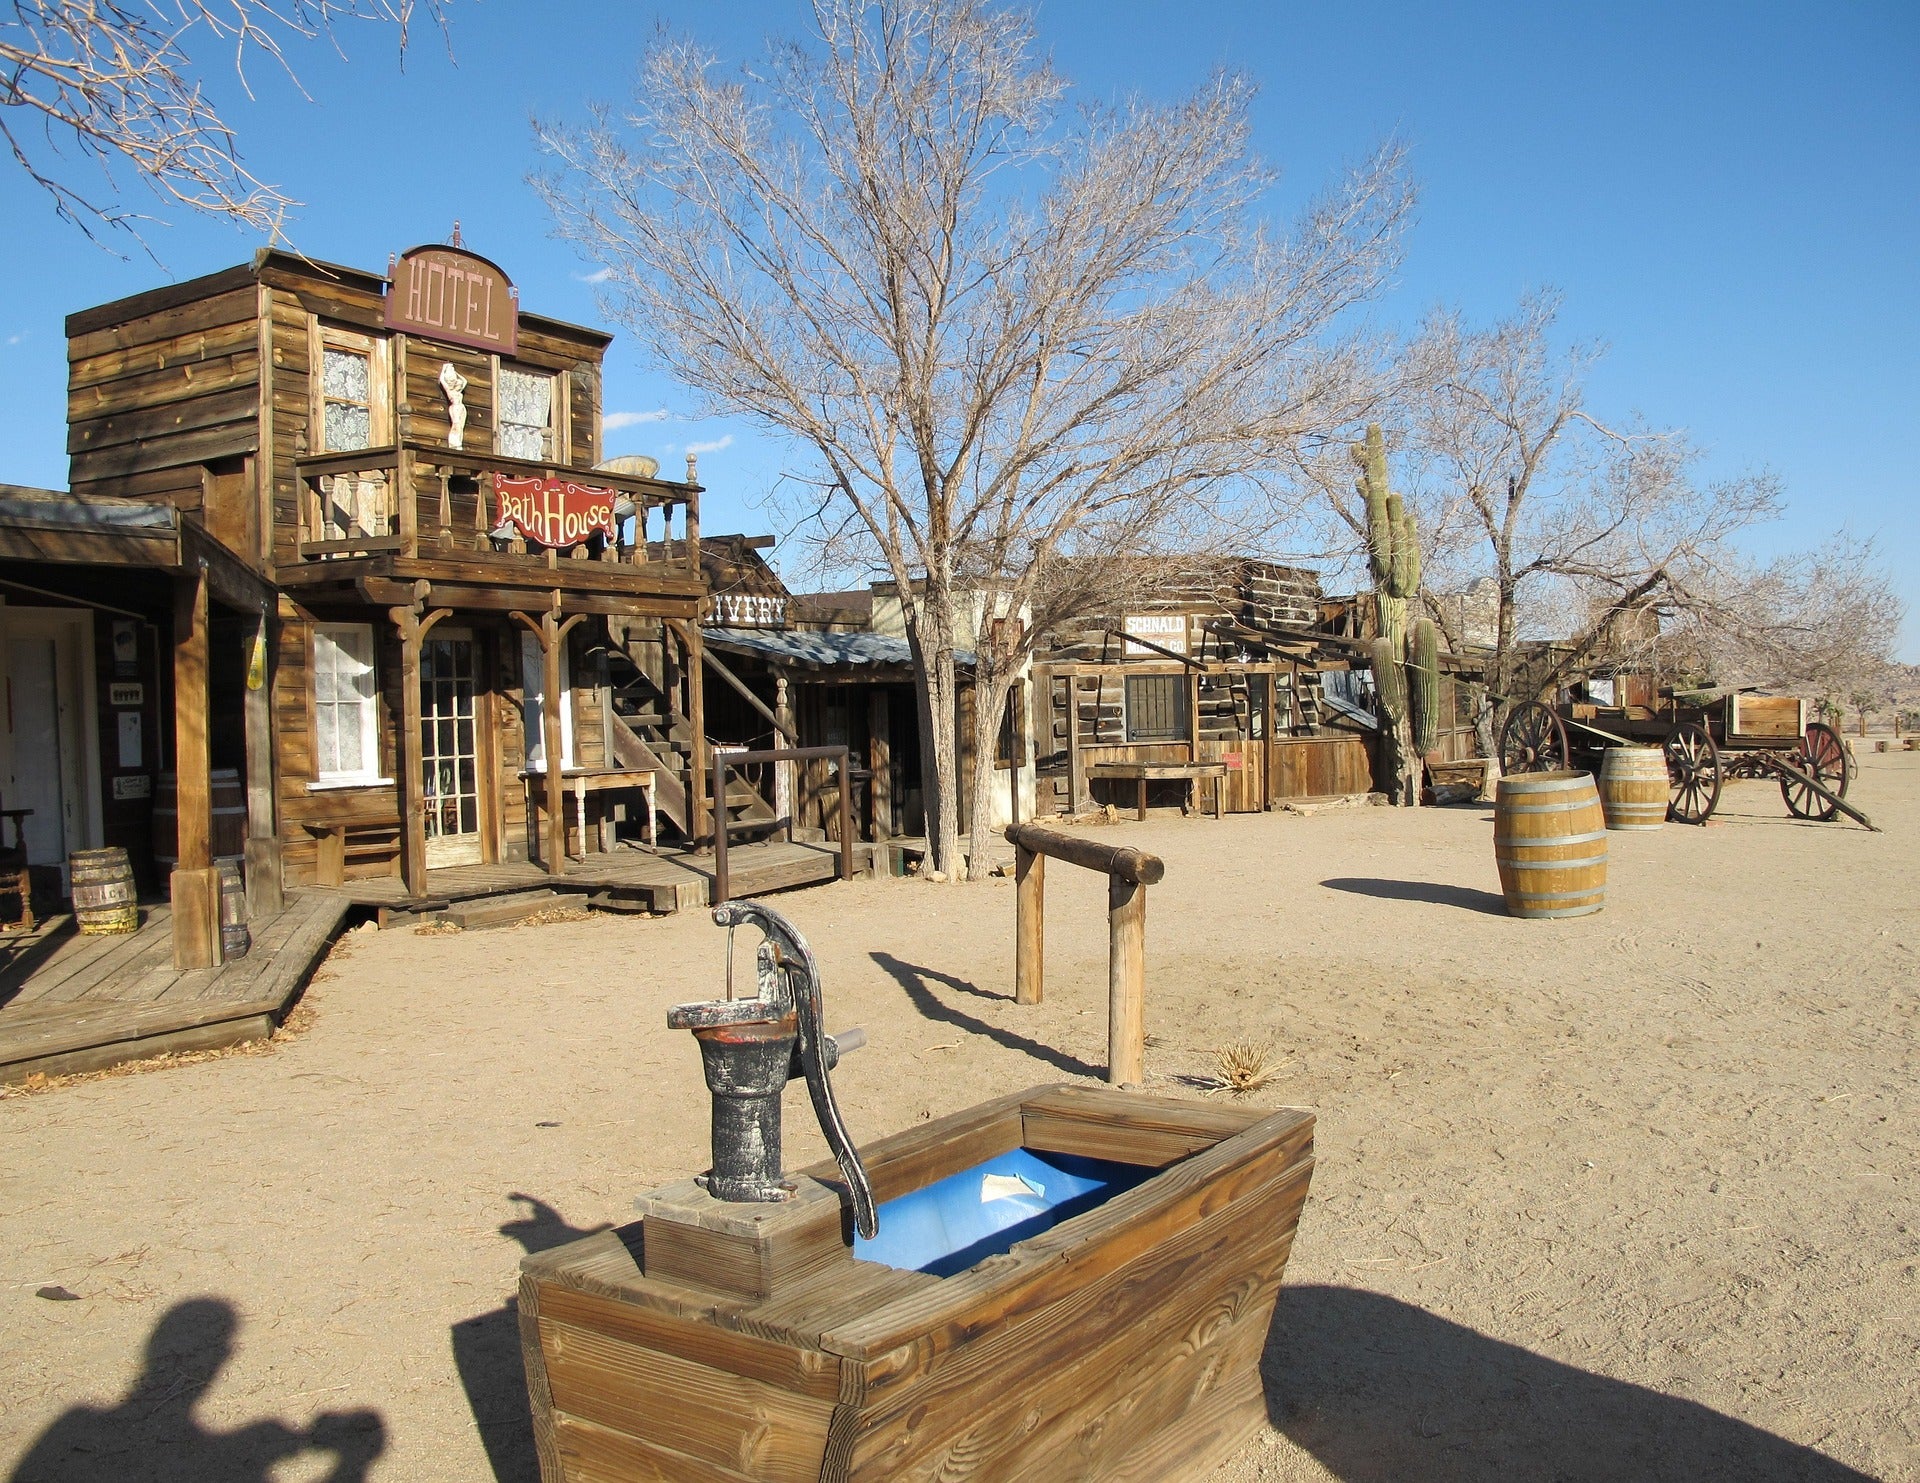 Top 5 Things to Do in Pioneertown (20minutes up the road from Joshua Tree)